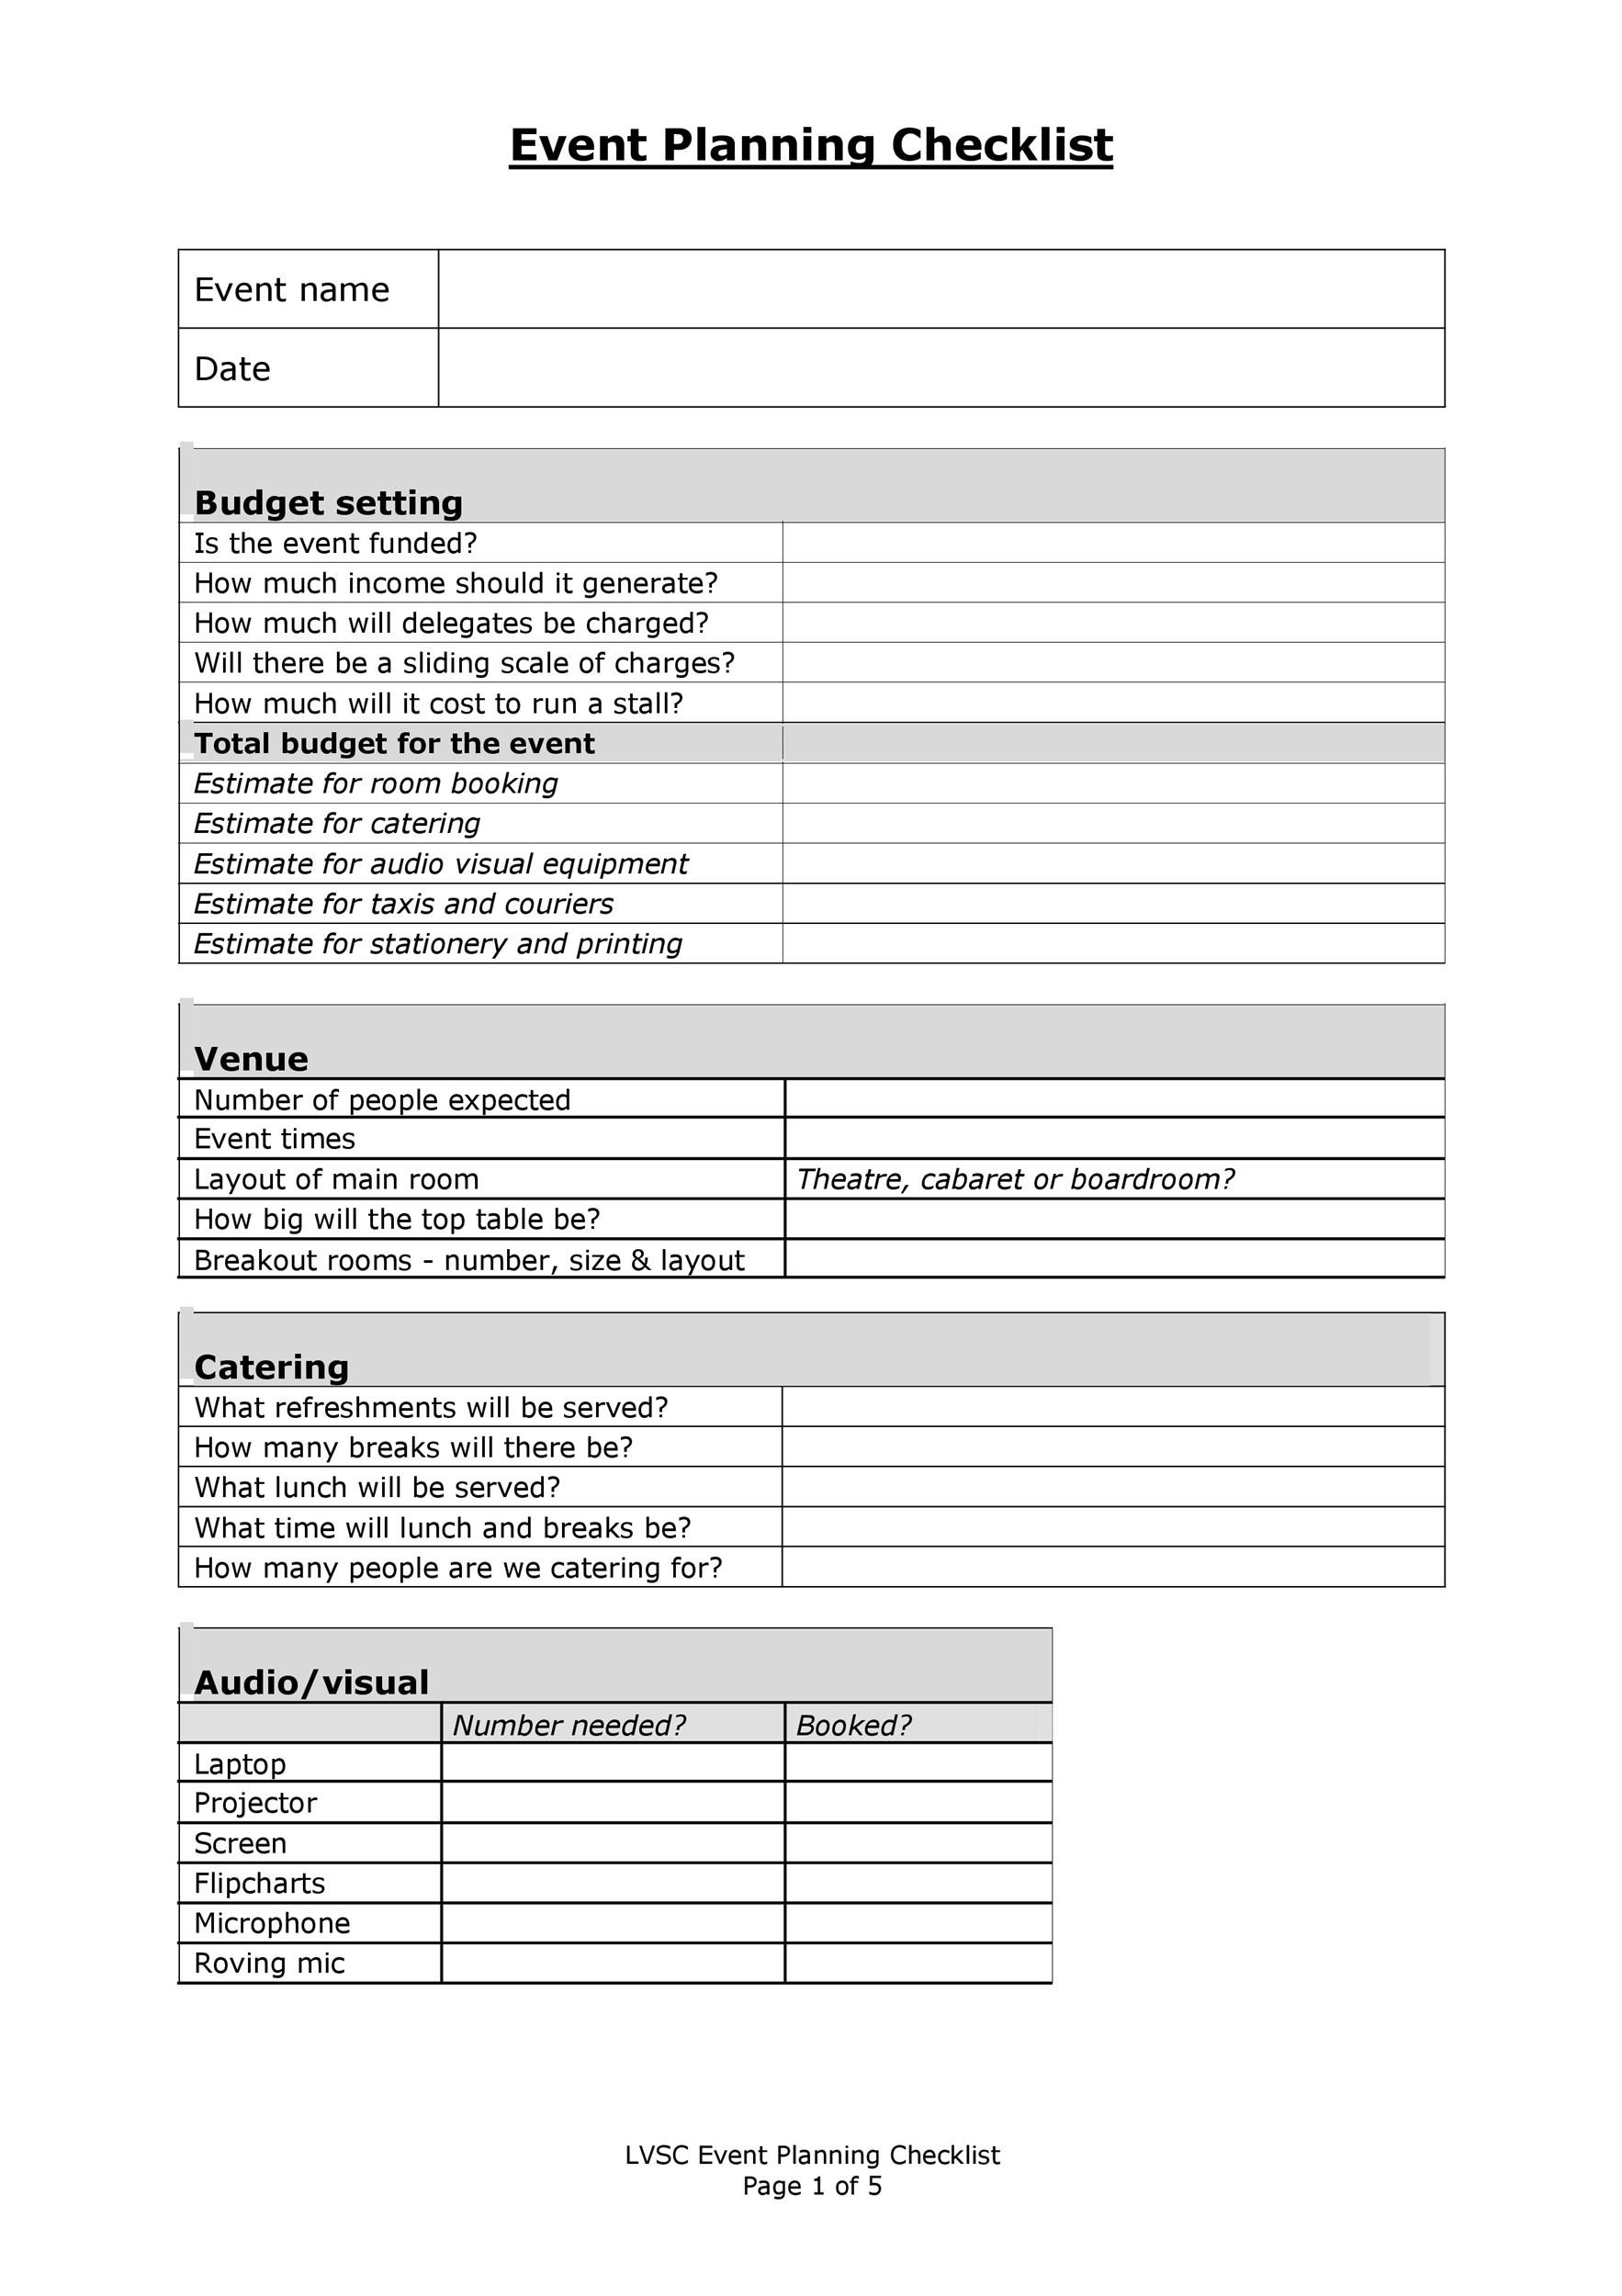 11 Professional Event Planning Checklist Templates ᐅ TemplateLab With Fundraising Event Planning Checklist Template Throughout Fundraising Event Planning Checklist Template